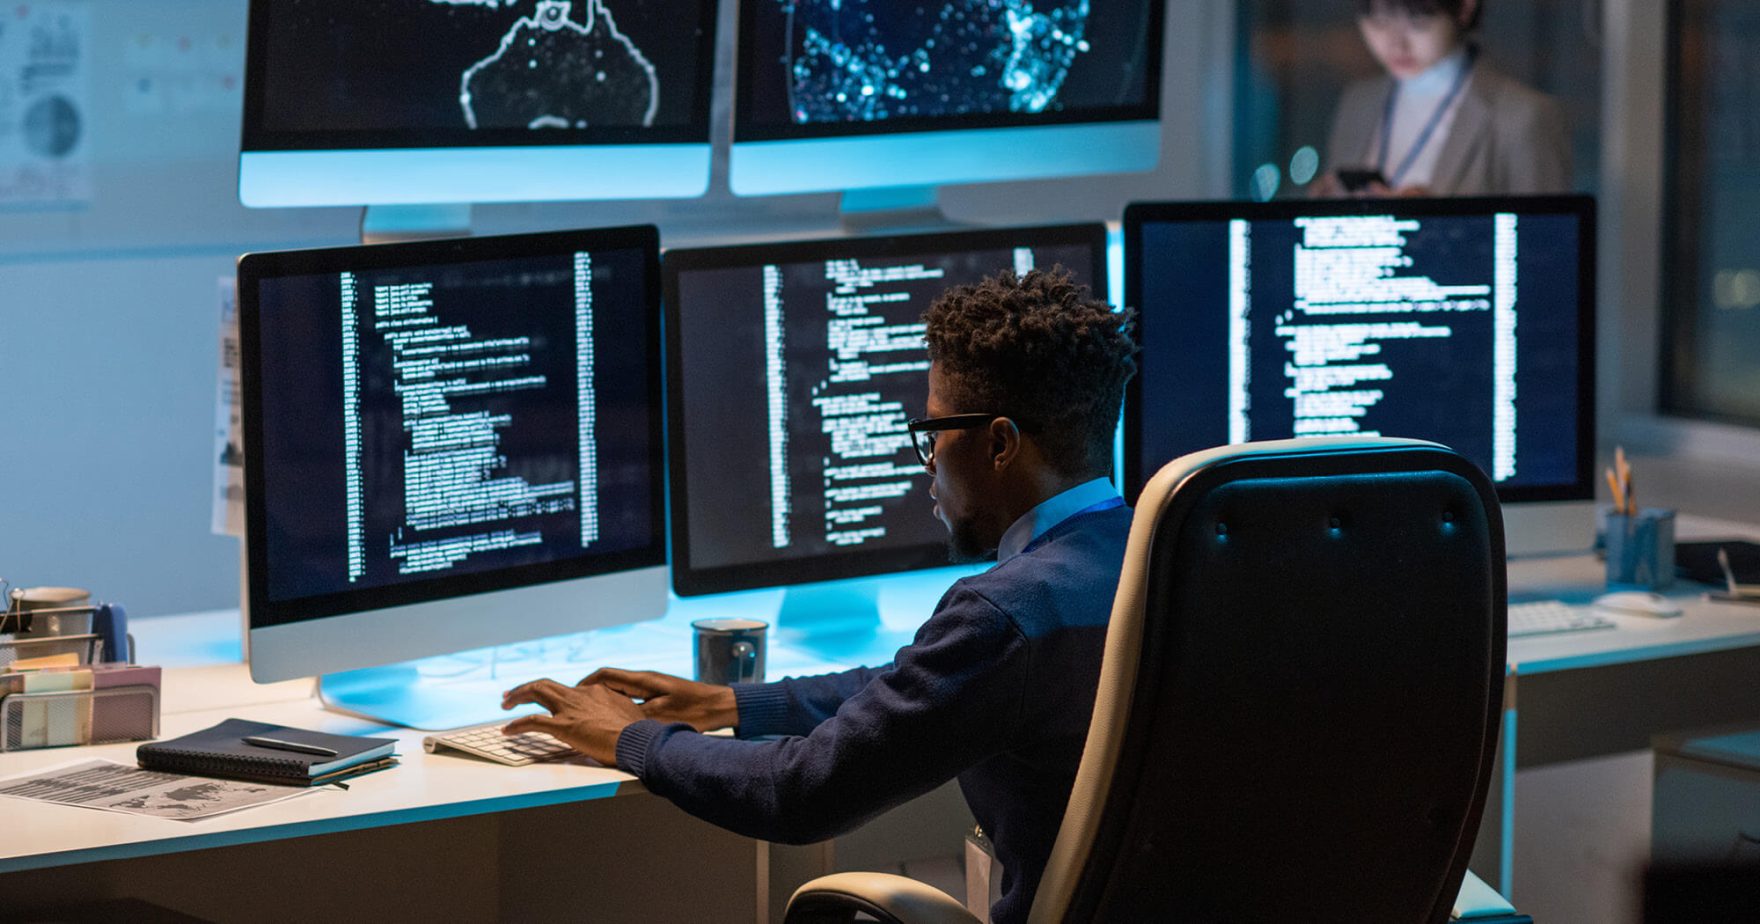 Regent University’s Cybersecurity Programs Hailed Among the Nation’s Best